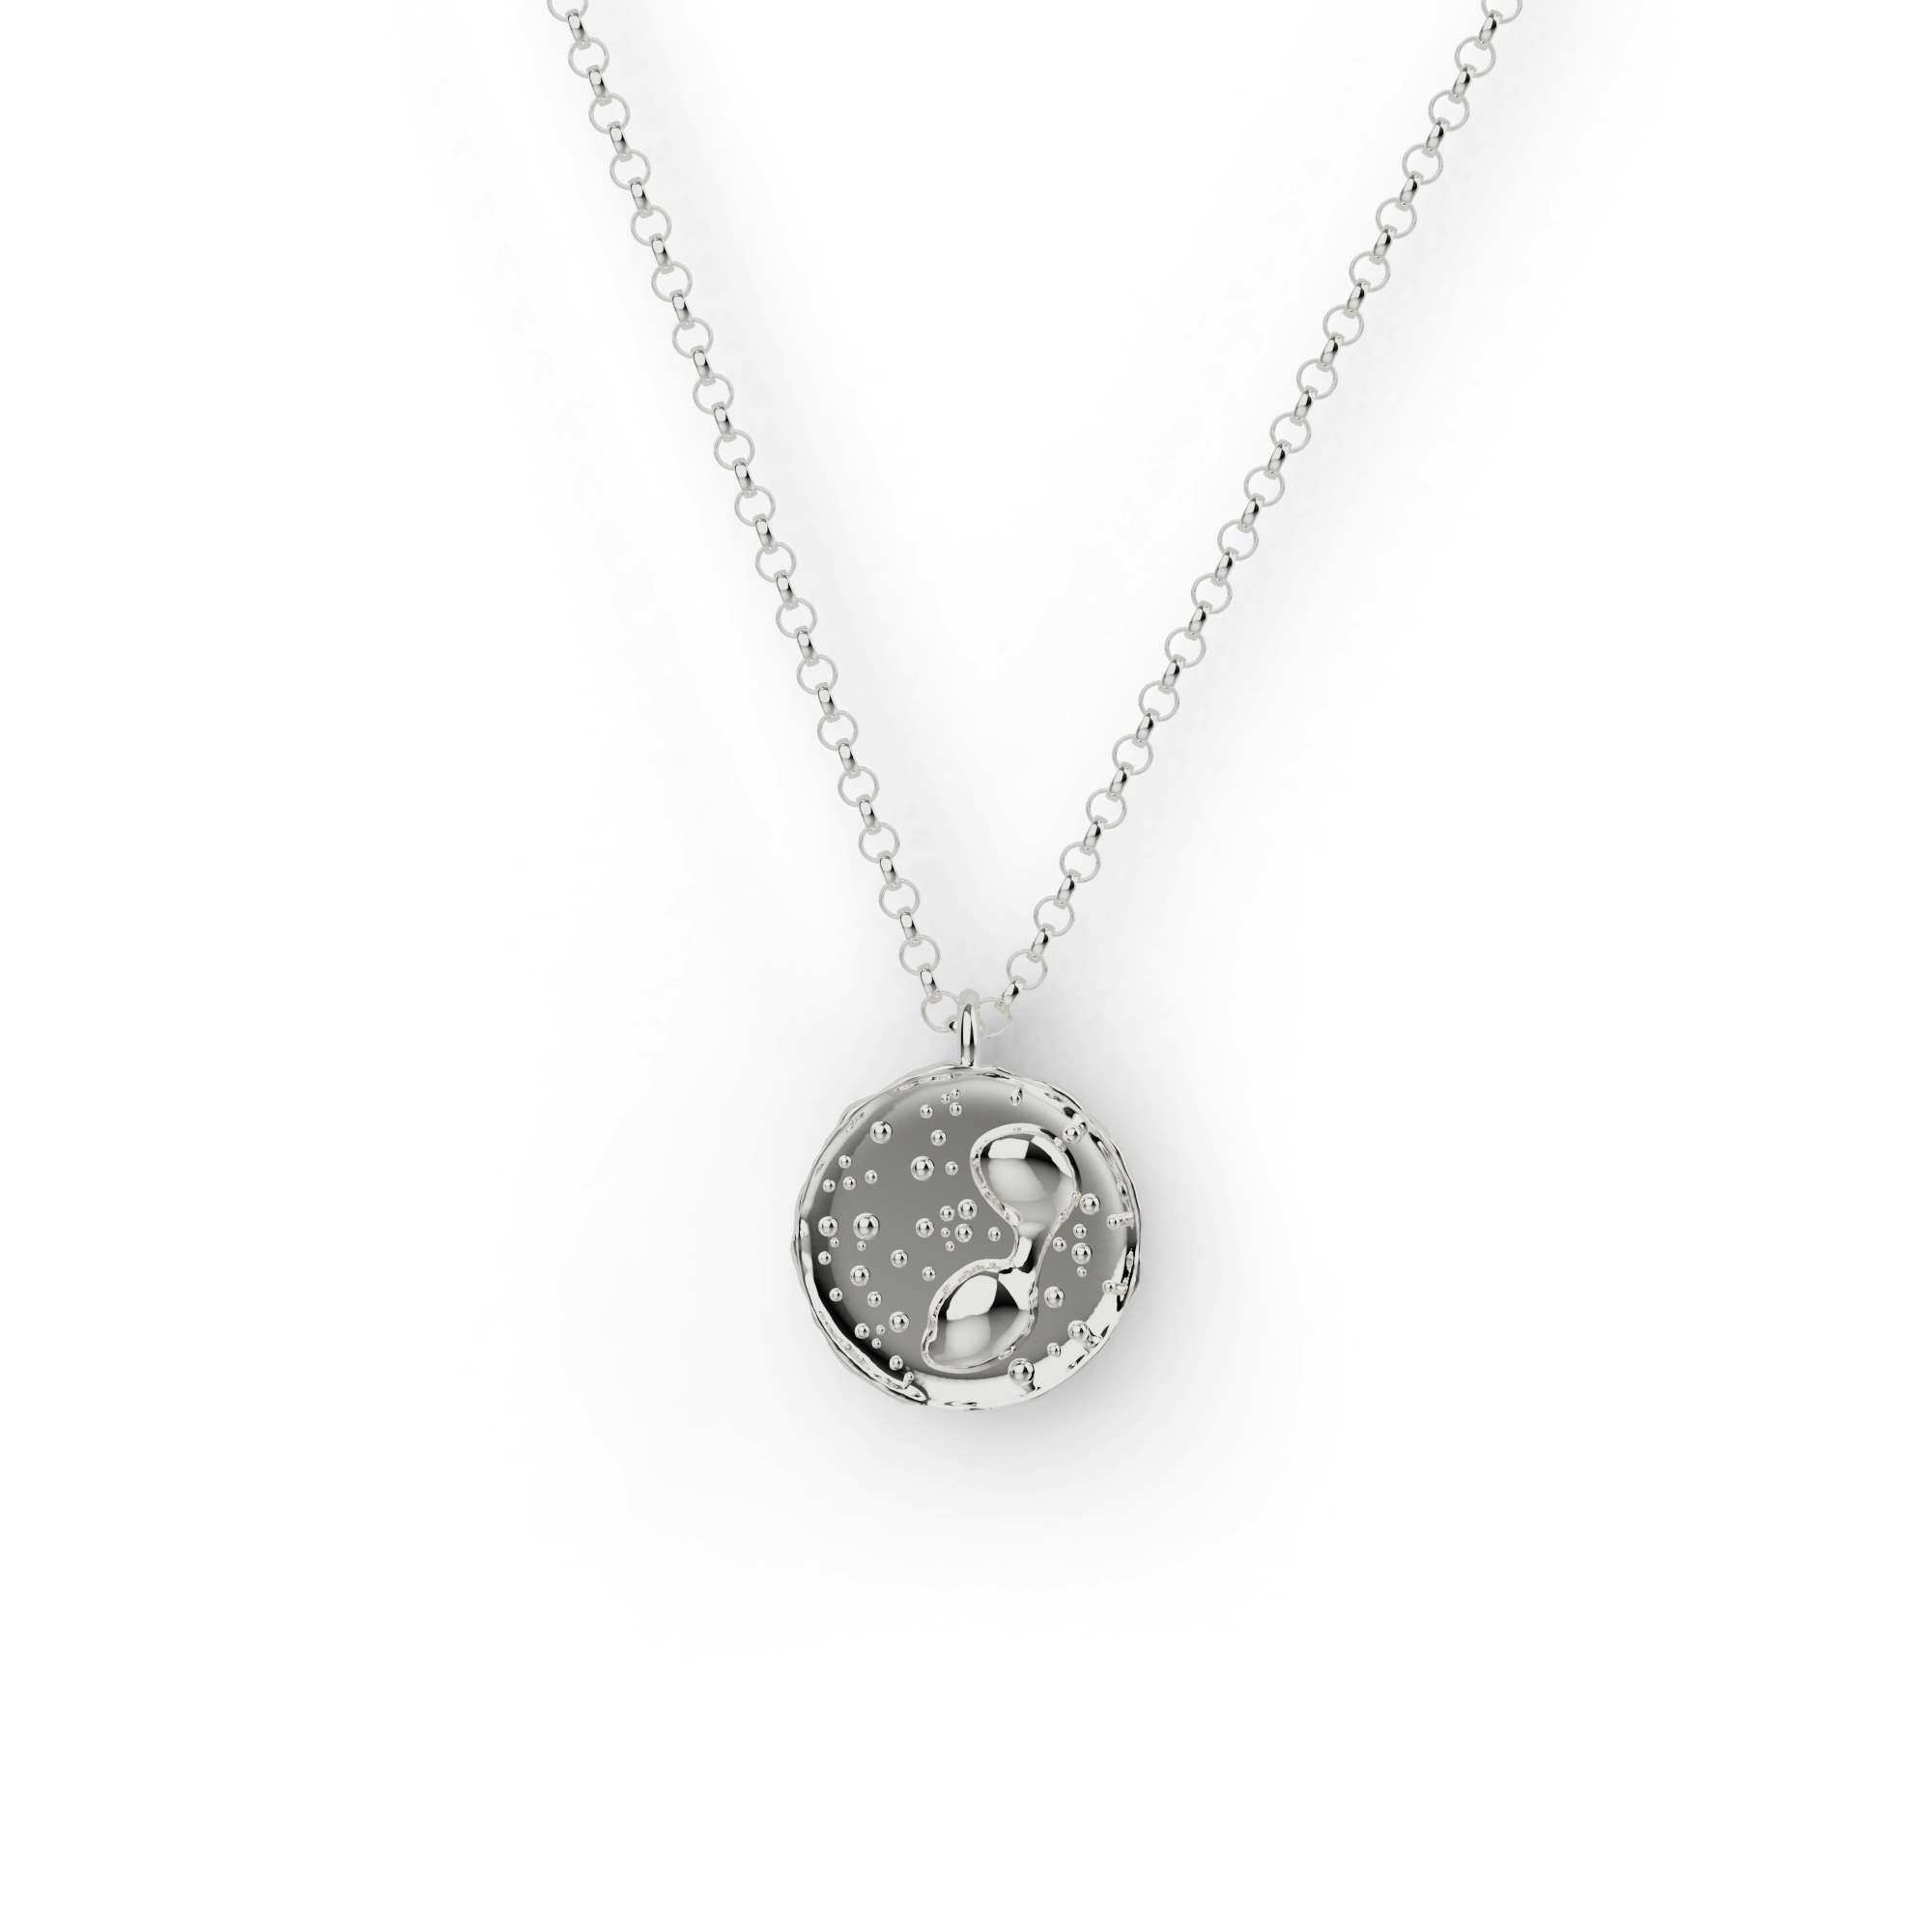 eosinophil necklace | silver